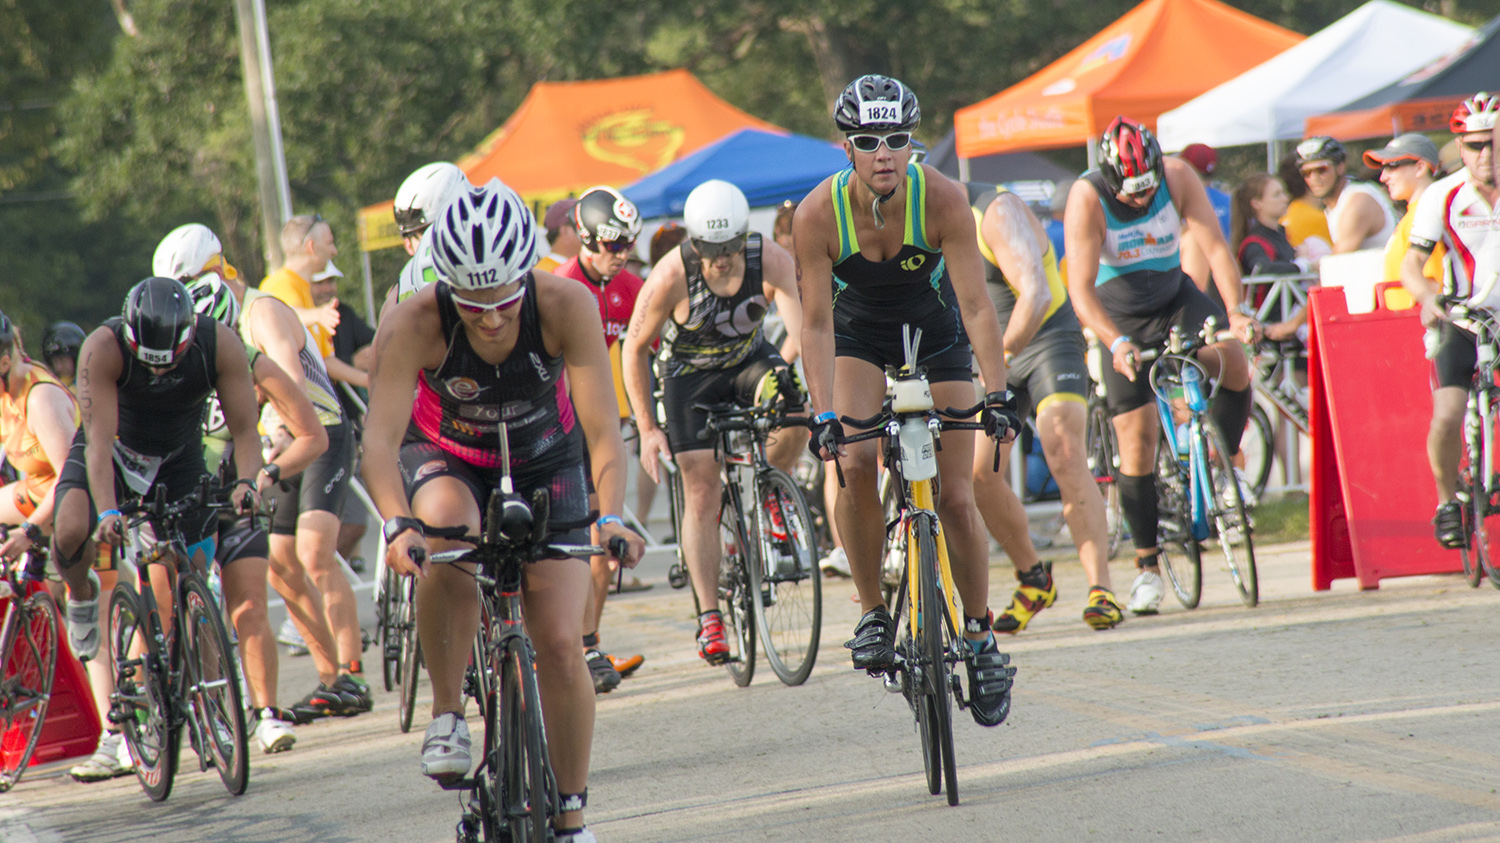 IRONMAN Muncie 70.3 What to Know Before You Race Mile for the Camera!